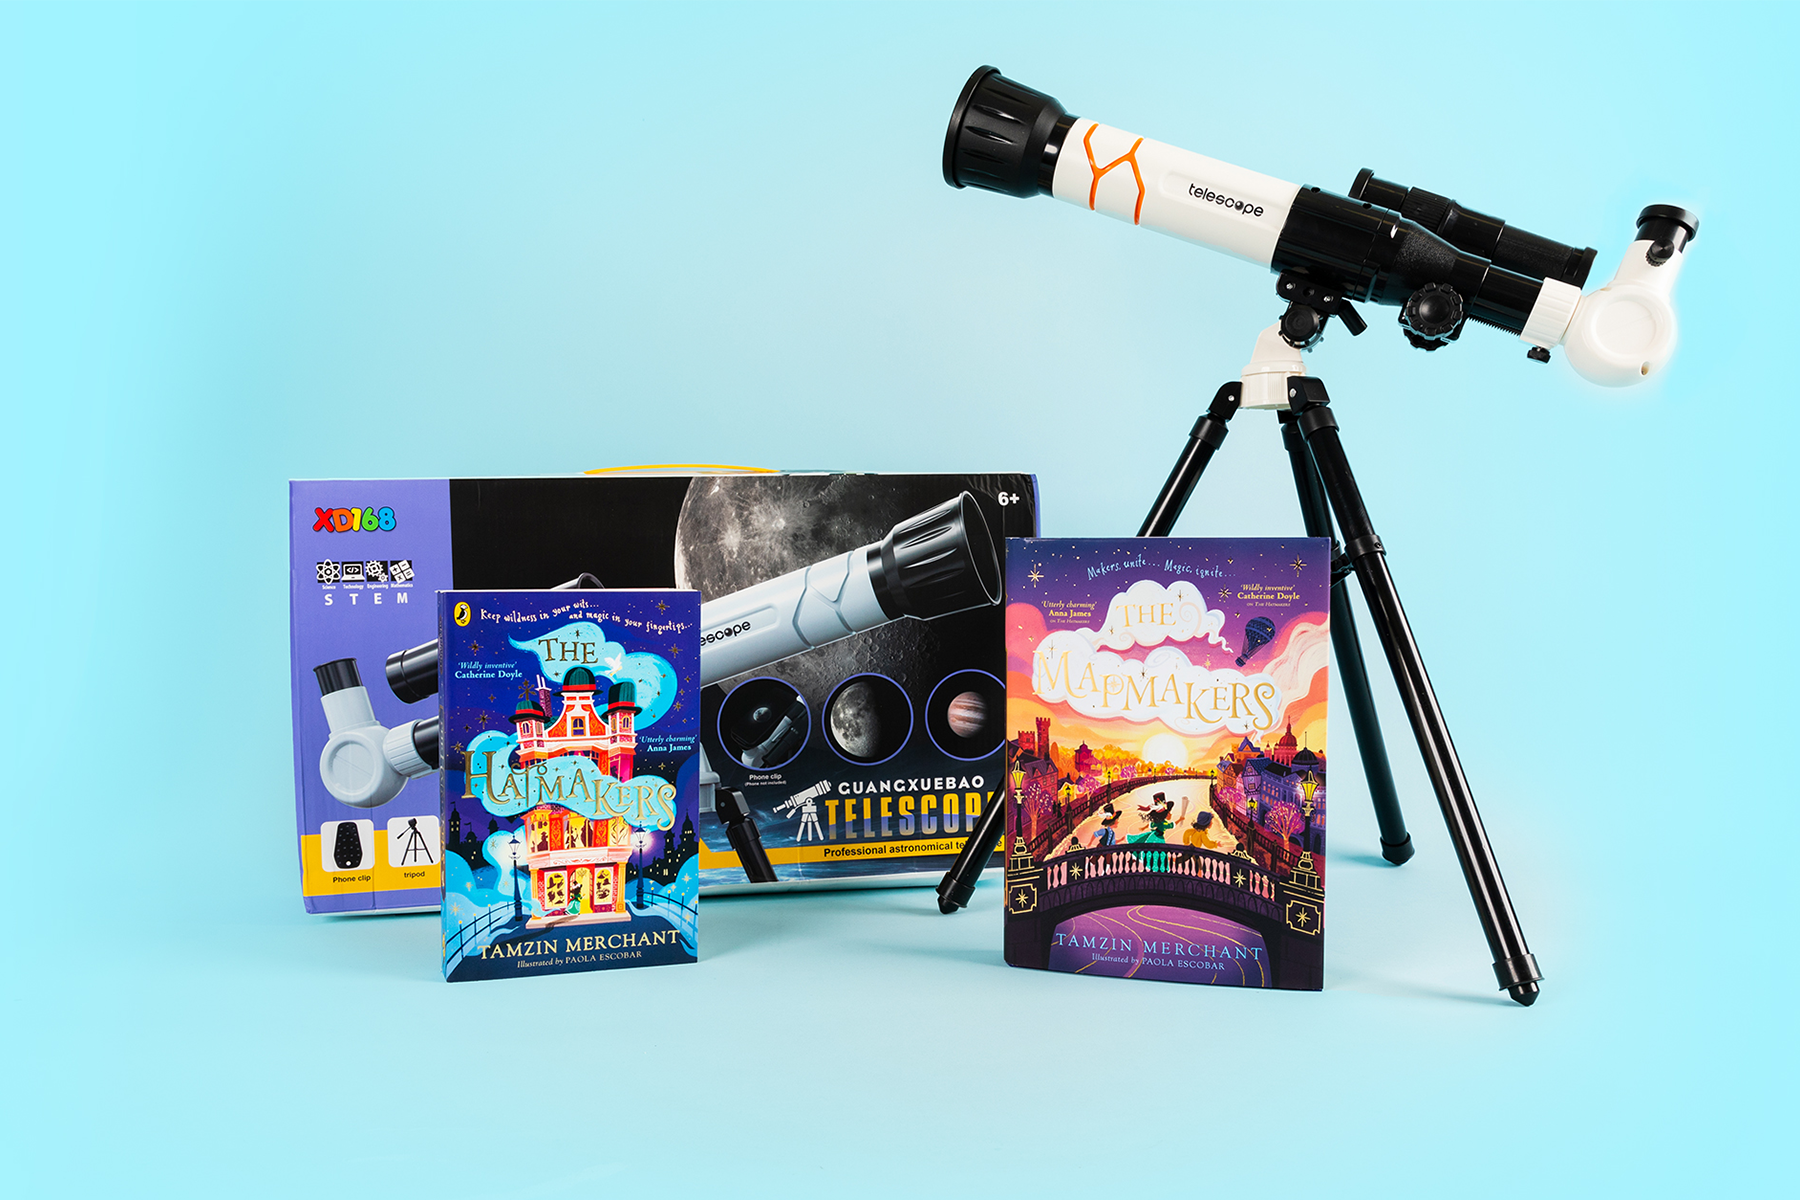 A photo of the books The Hatmakers and The Mapmakers alongside a telescope, against a light blue background